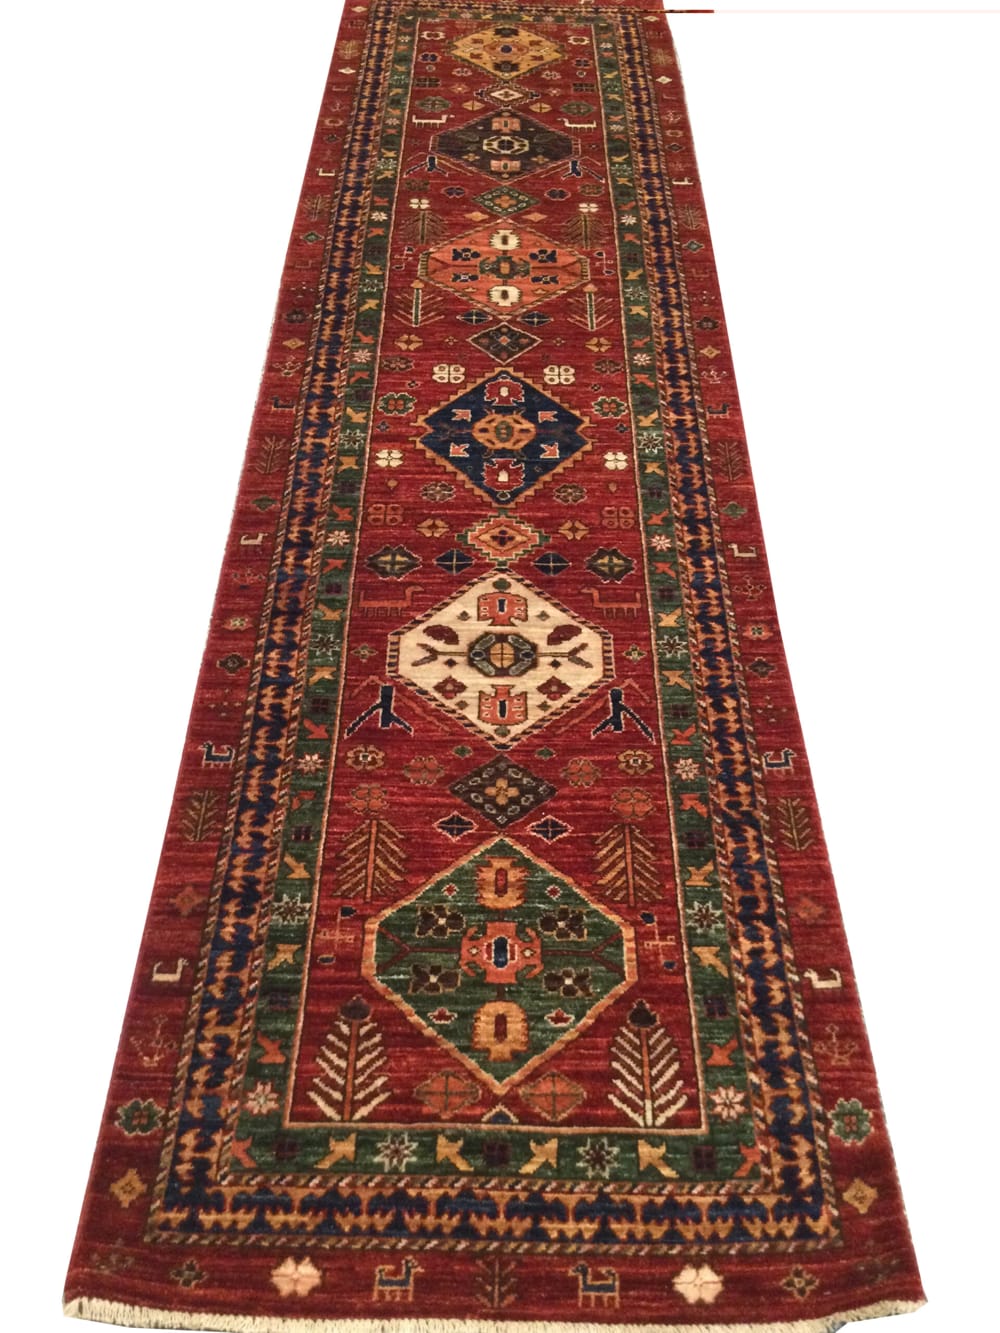 Rug# 26384 Afghan Turkaman weave, 19th Caucasian inspired, hand spun wool, Vegetable dyes, size 309x82 cm (2)